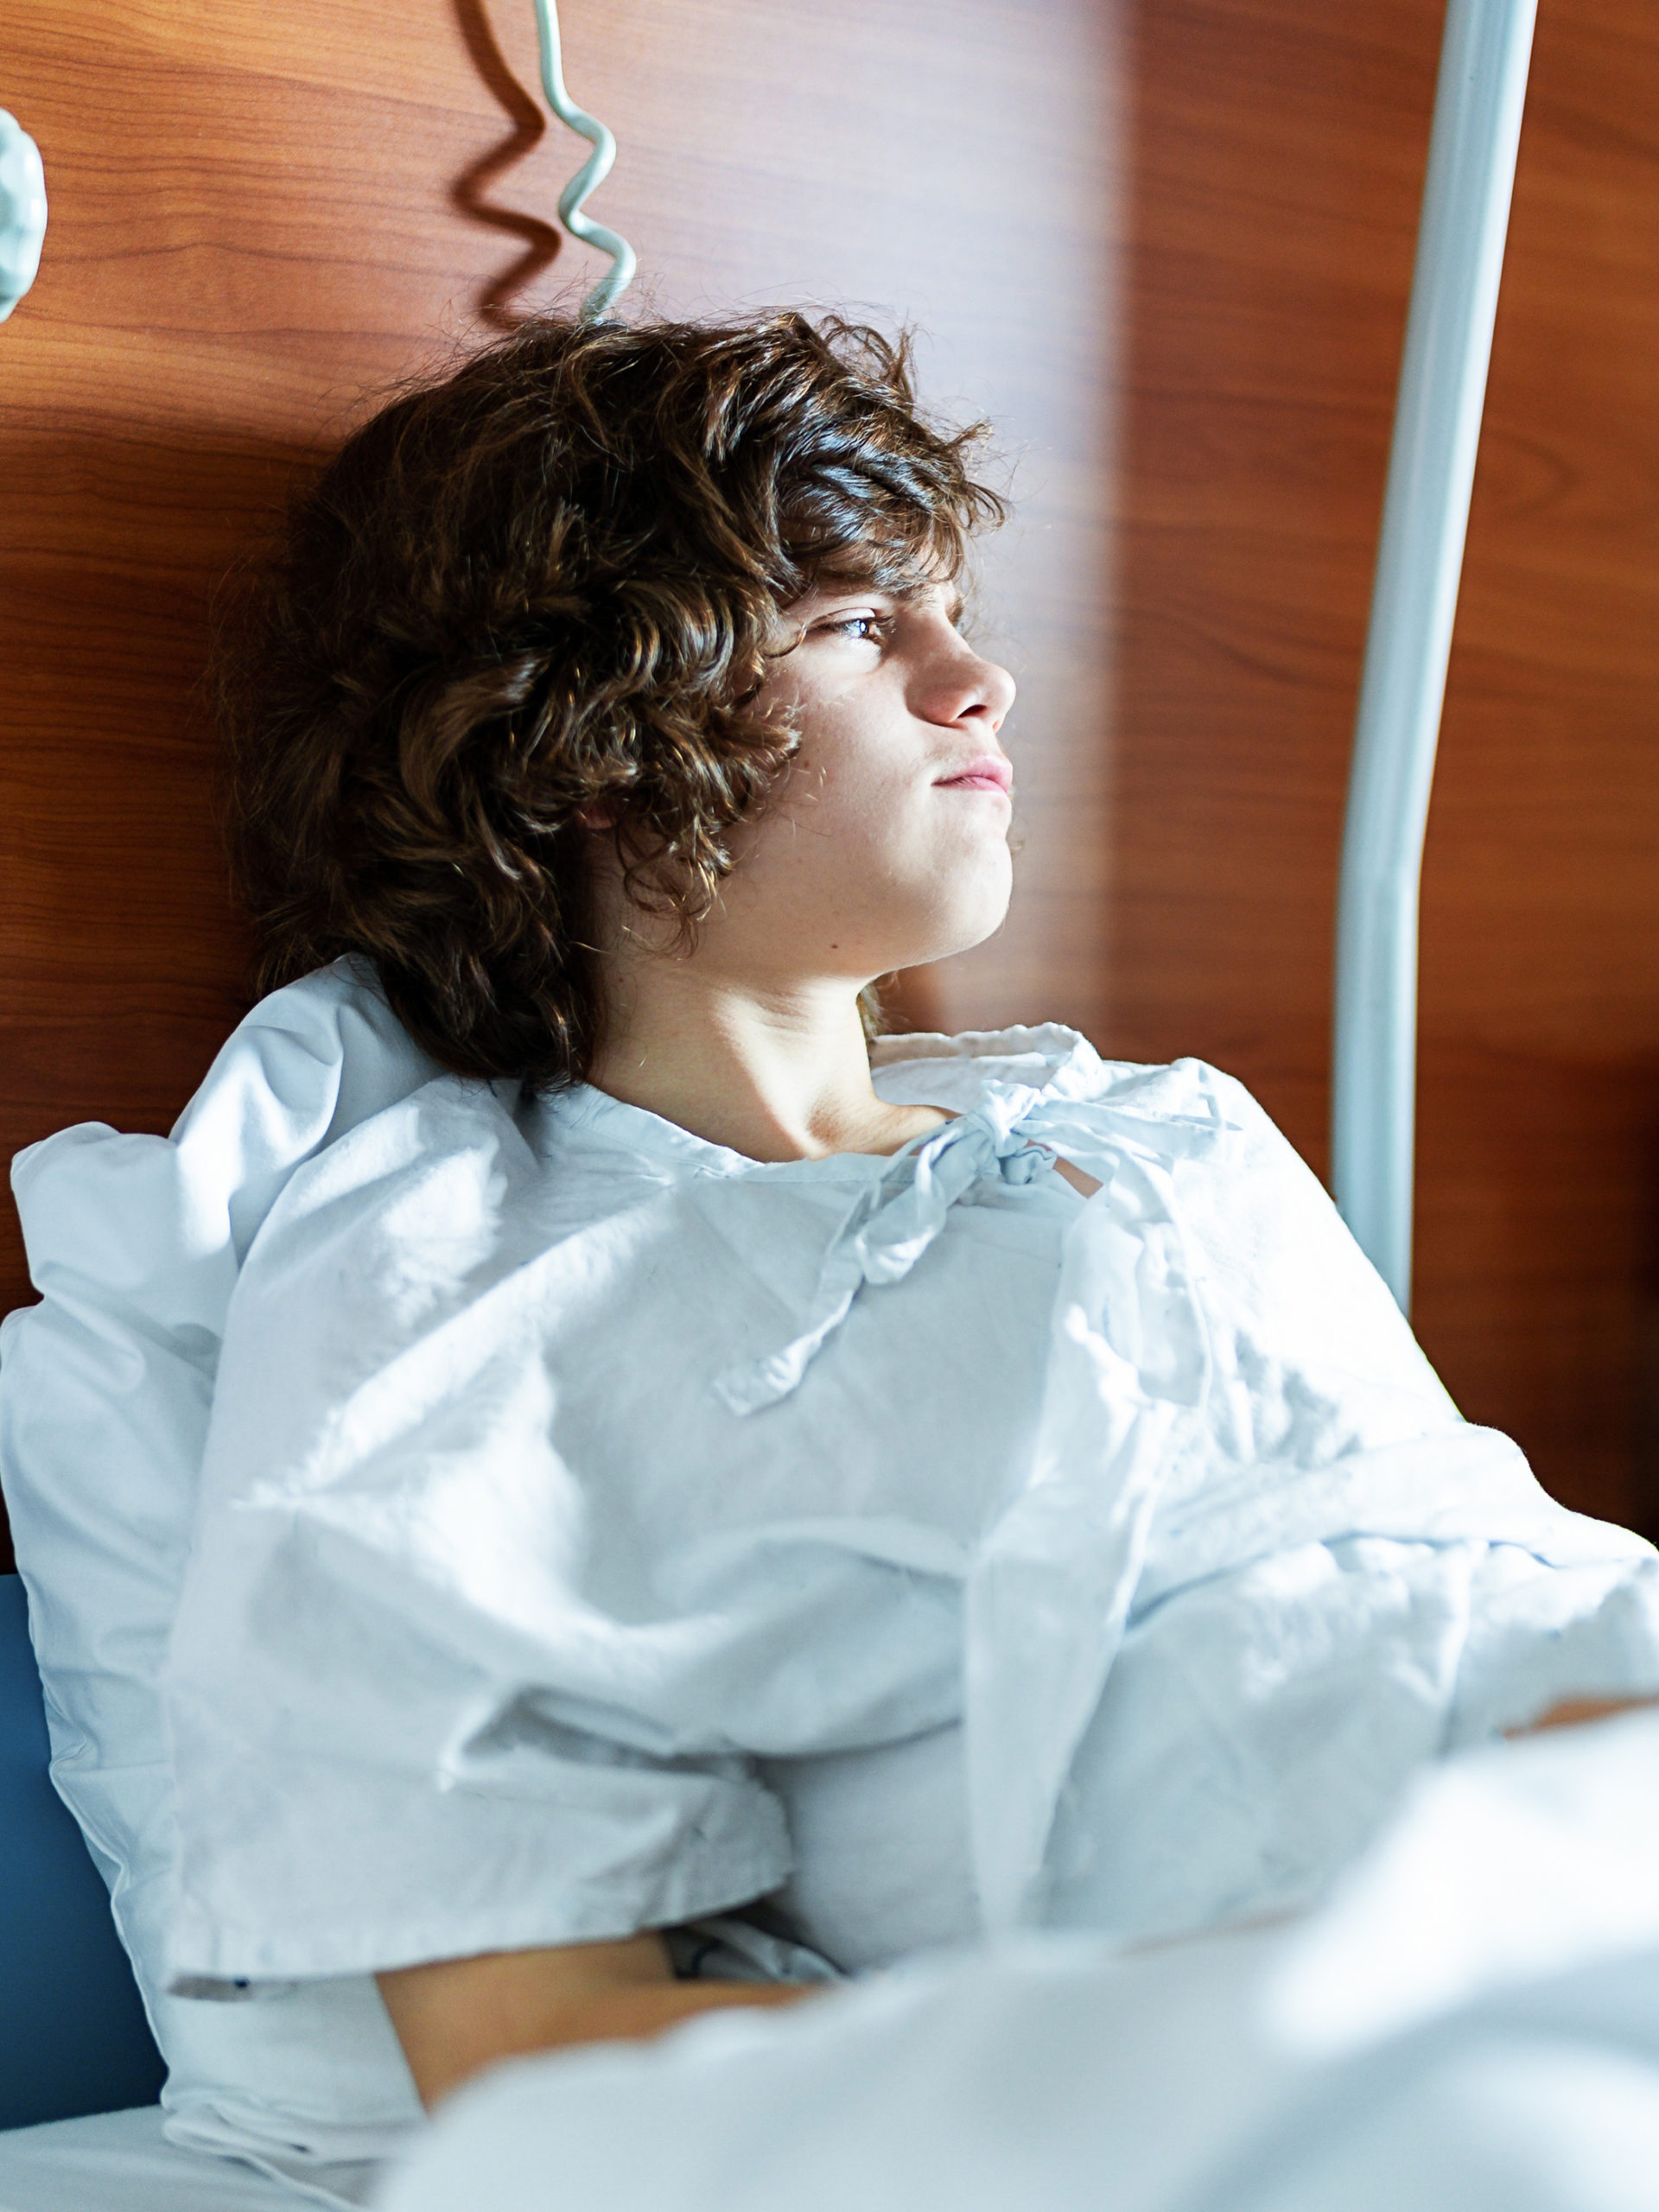 teen boy sitting in a hospital bed looking distraught